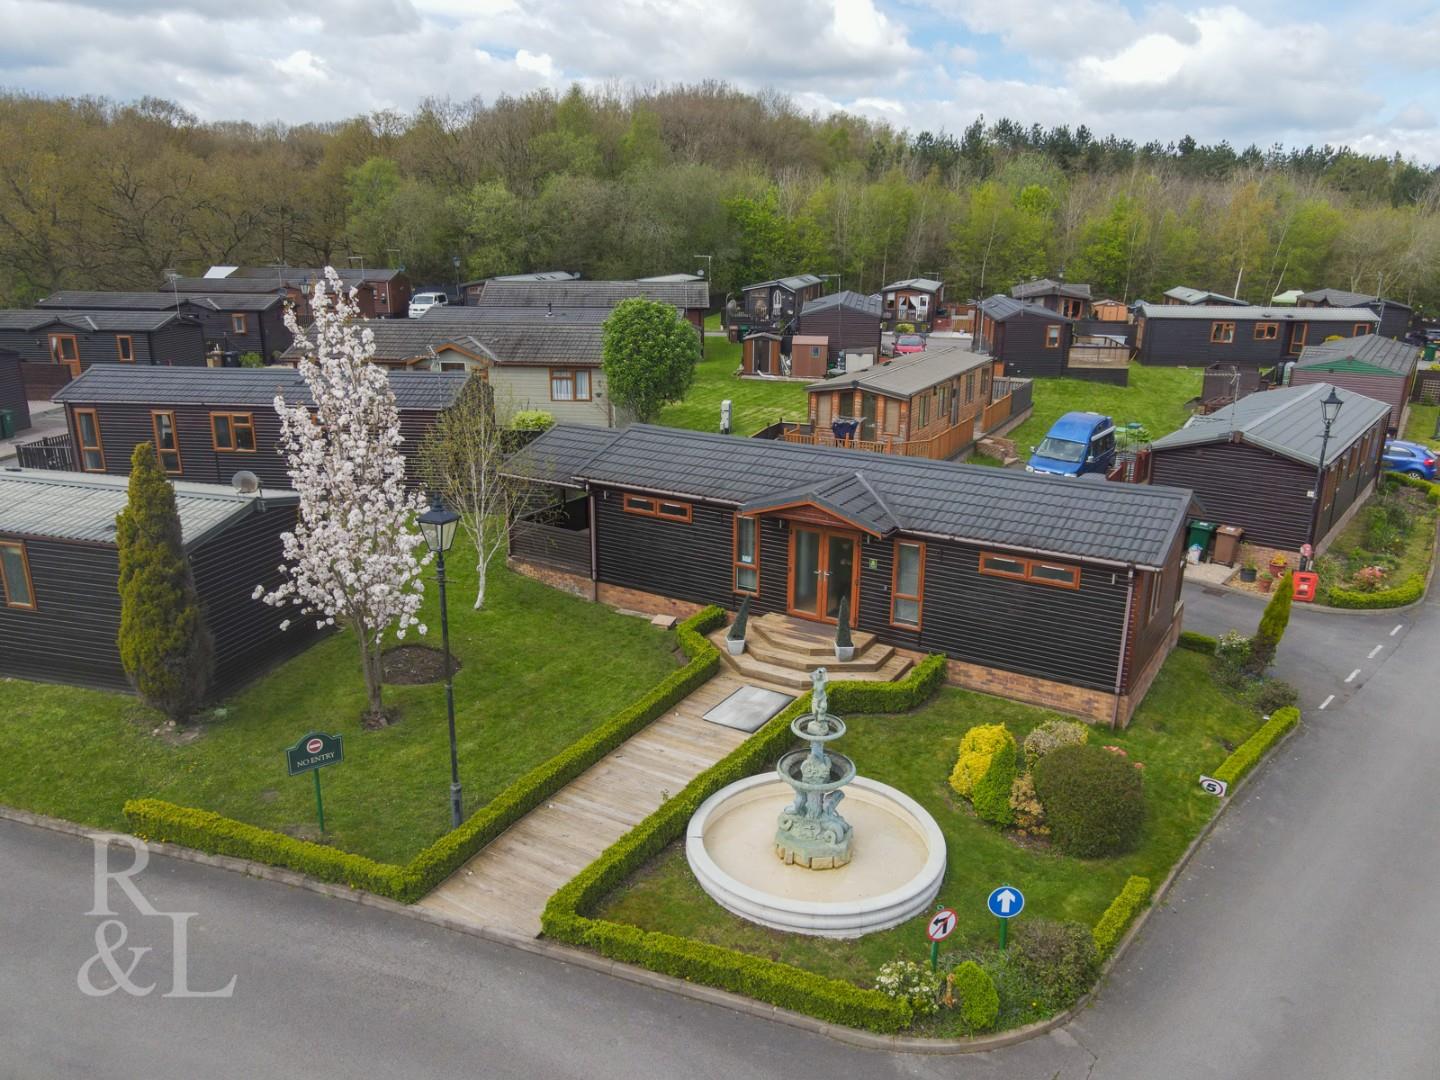 Property image for Swainswood Luxury Lodges, Overseal, Derbyshire